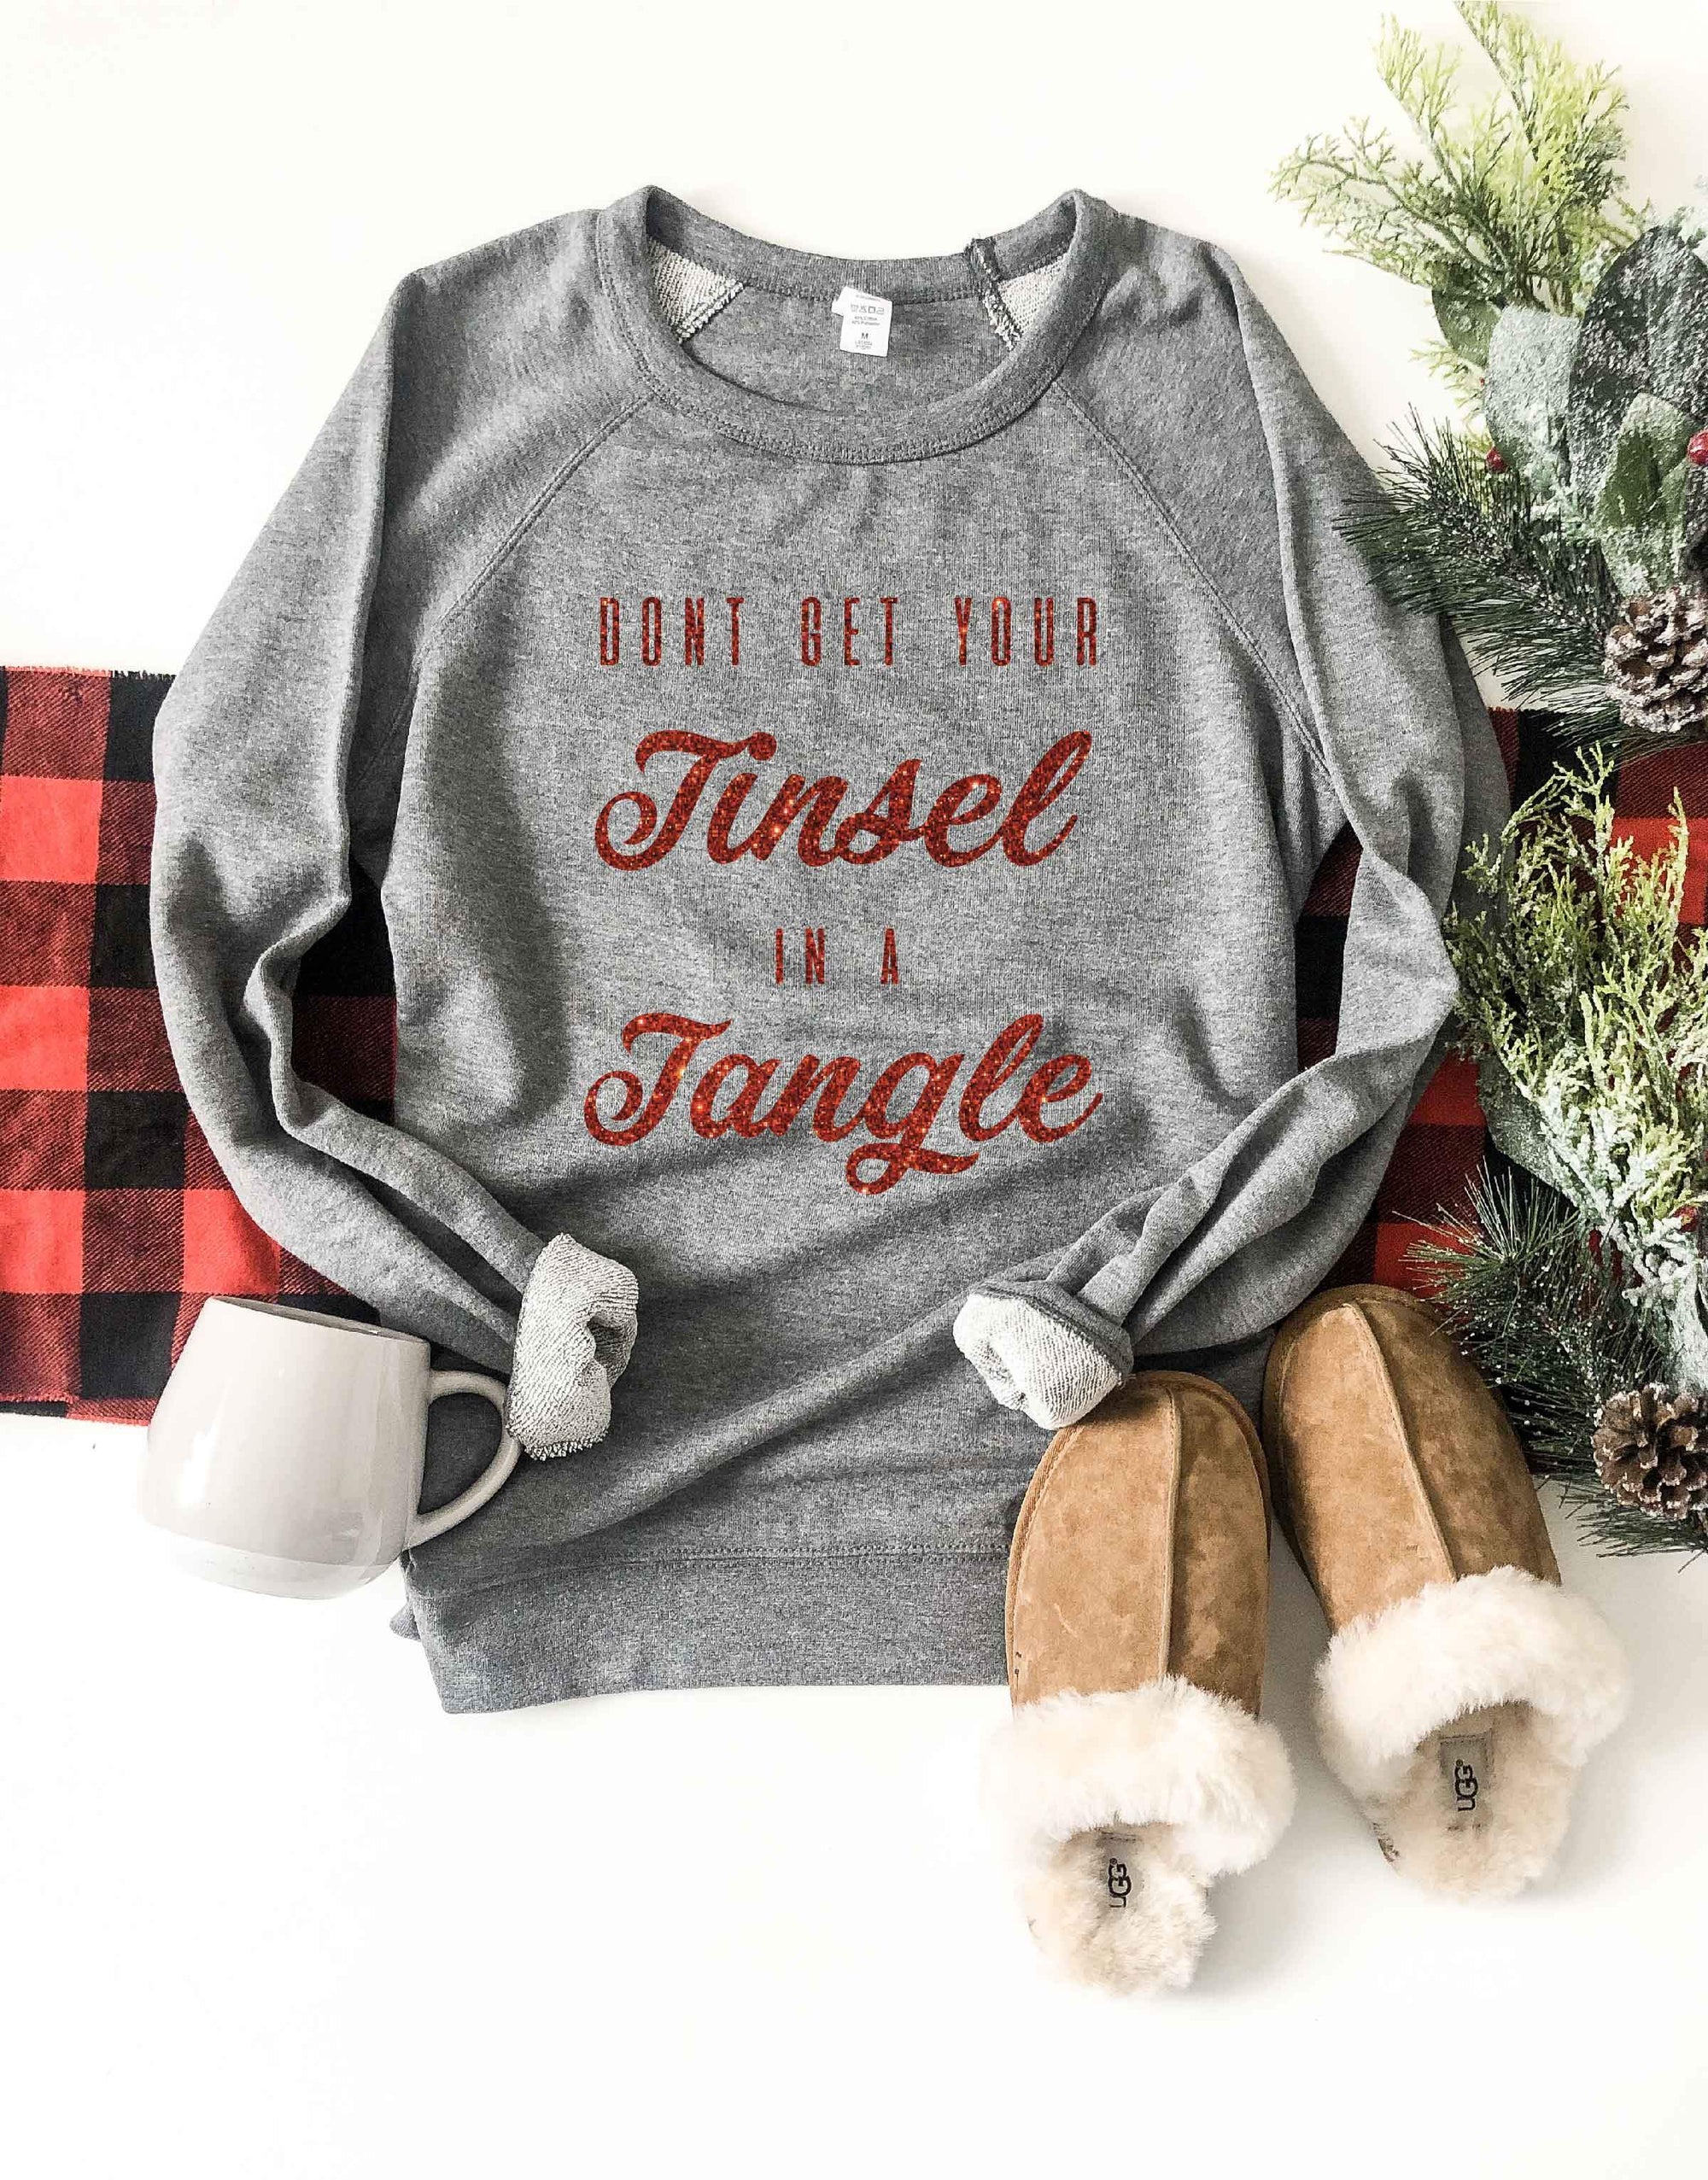 Tinsel in a tangle french terry raglan sweatshirt Holiday sweatshirt Cotton heritage and lane seven French Terry raglan XS Heather grey 